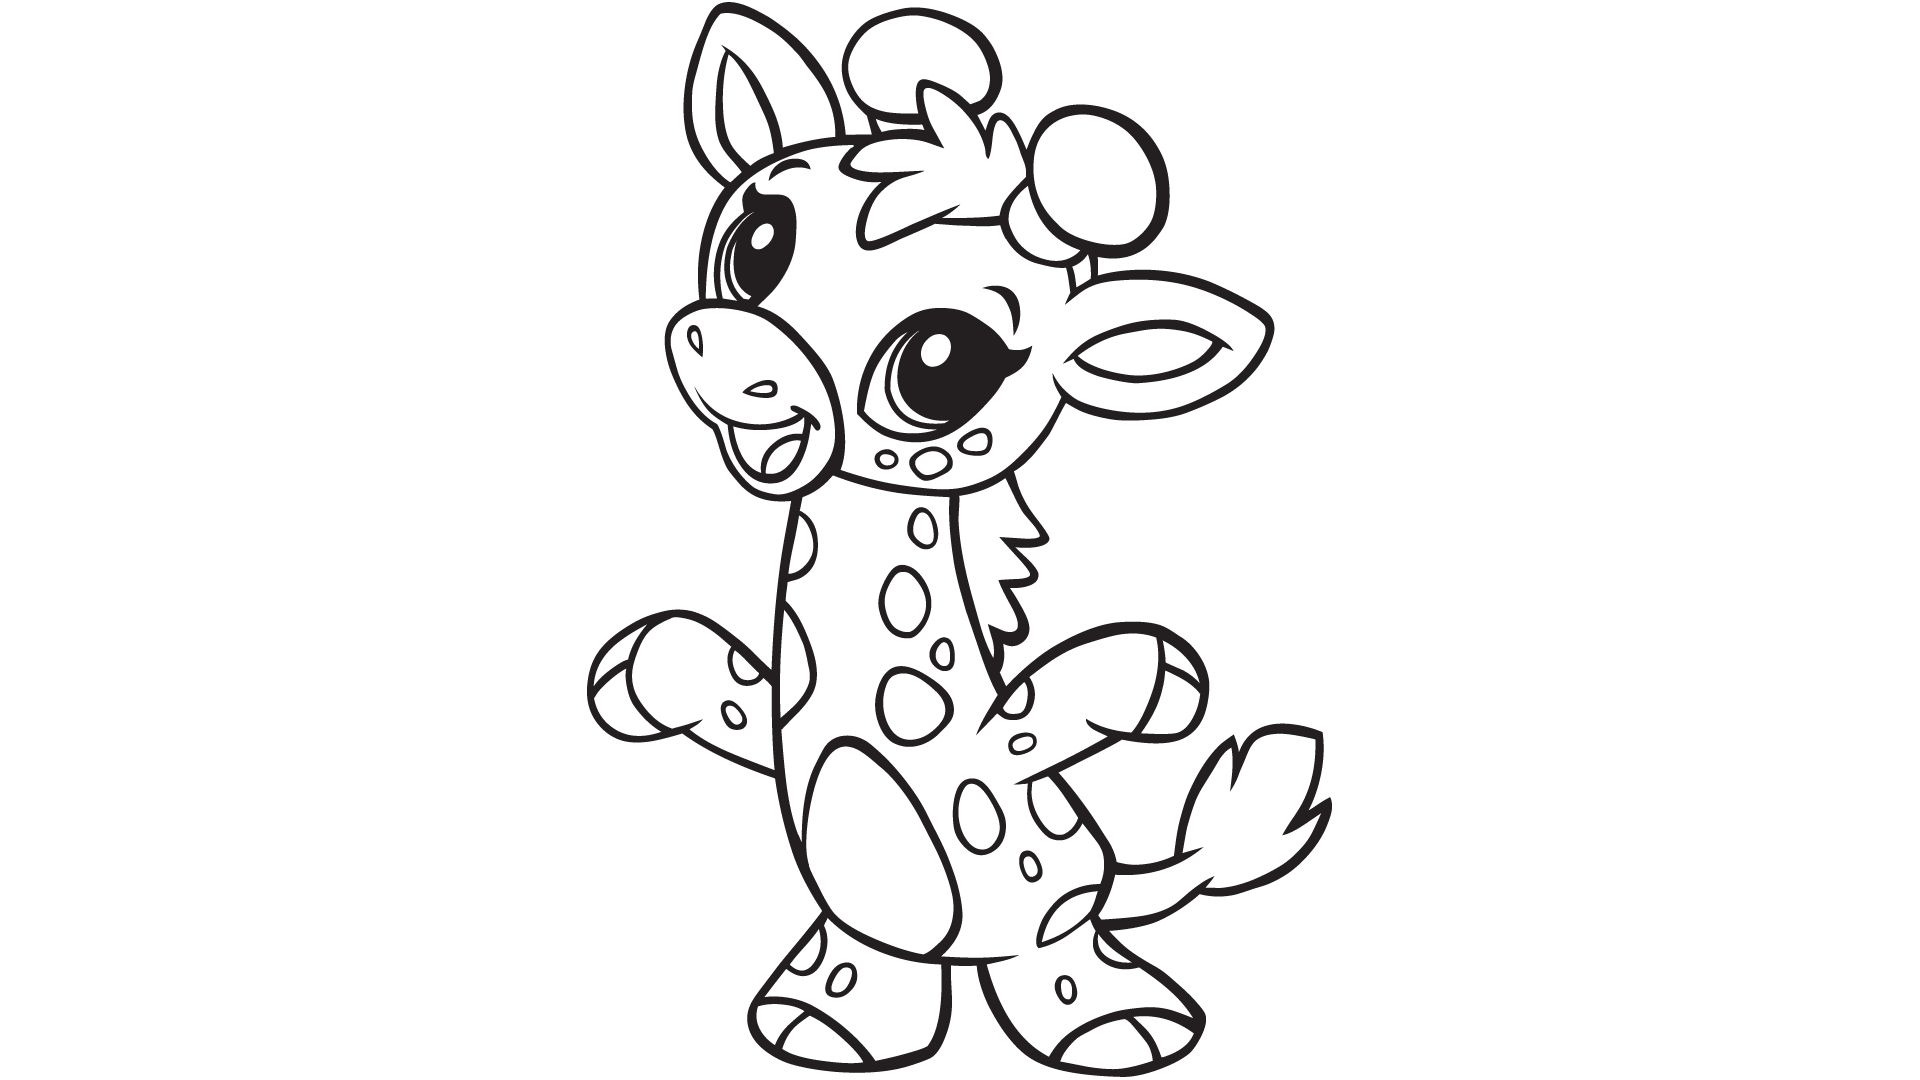 Coloring Pages Giraffe   FastShareVN